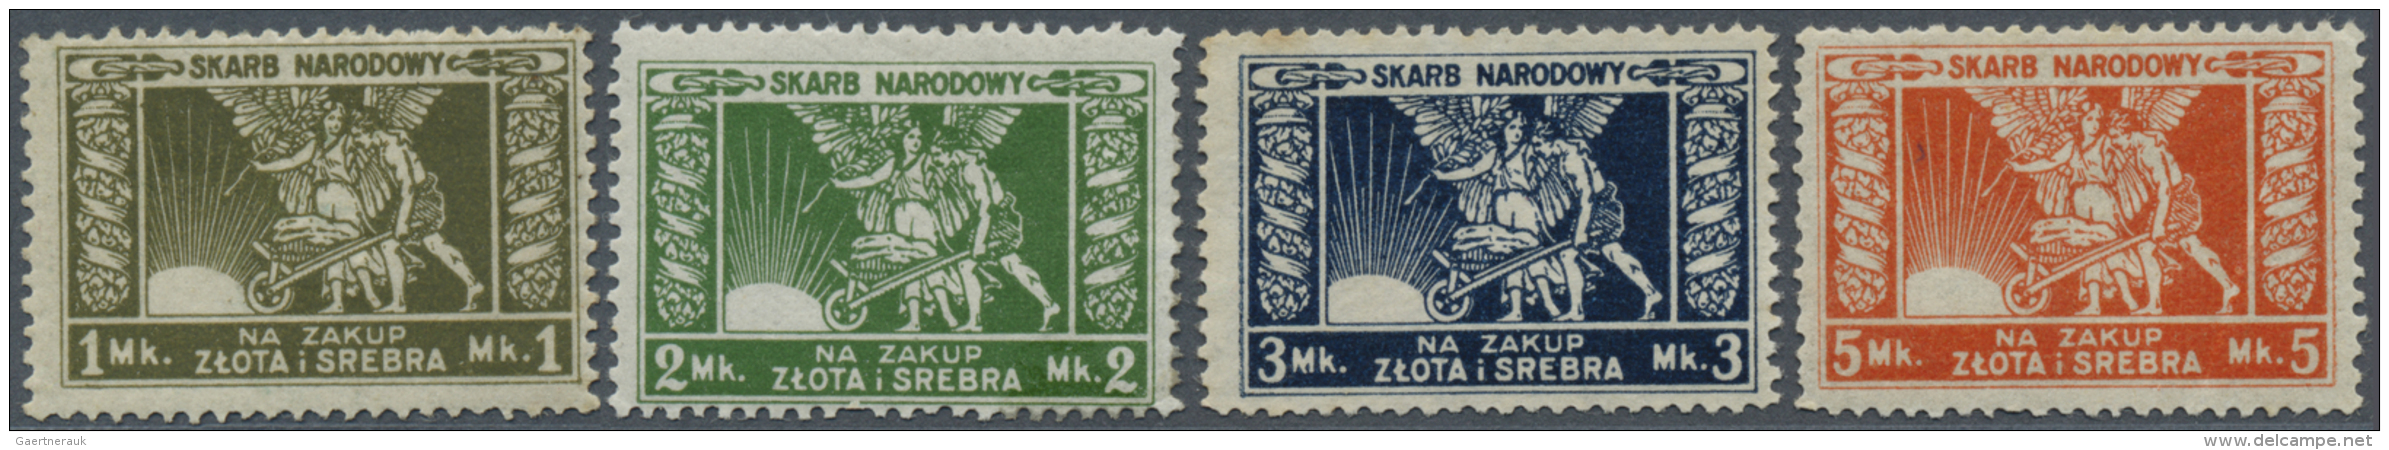 Poland / Polen: Set Of 4 Stamp Issues Skarb Narodowy From 1 Marka Up To 5 Marek, P. NL Without Date (1920-24), Condition - Pologne